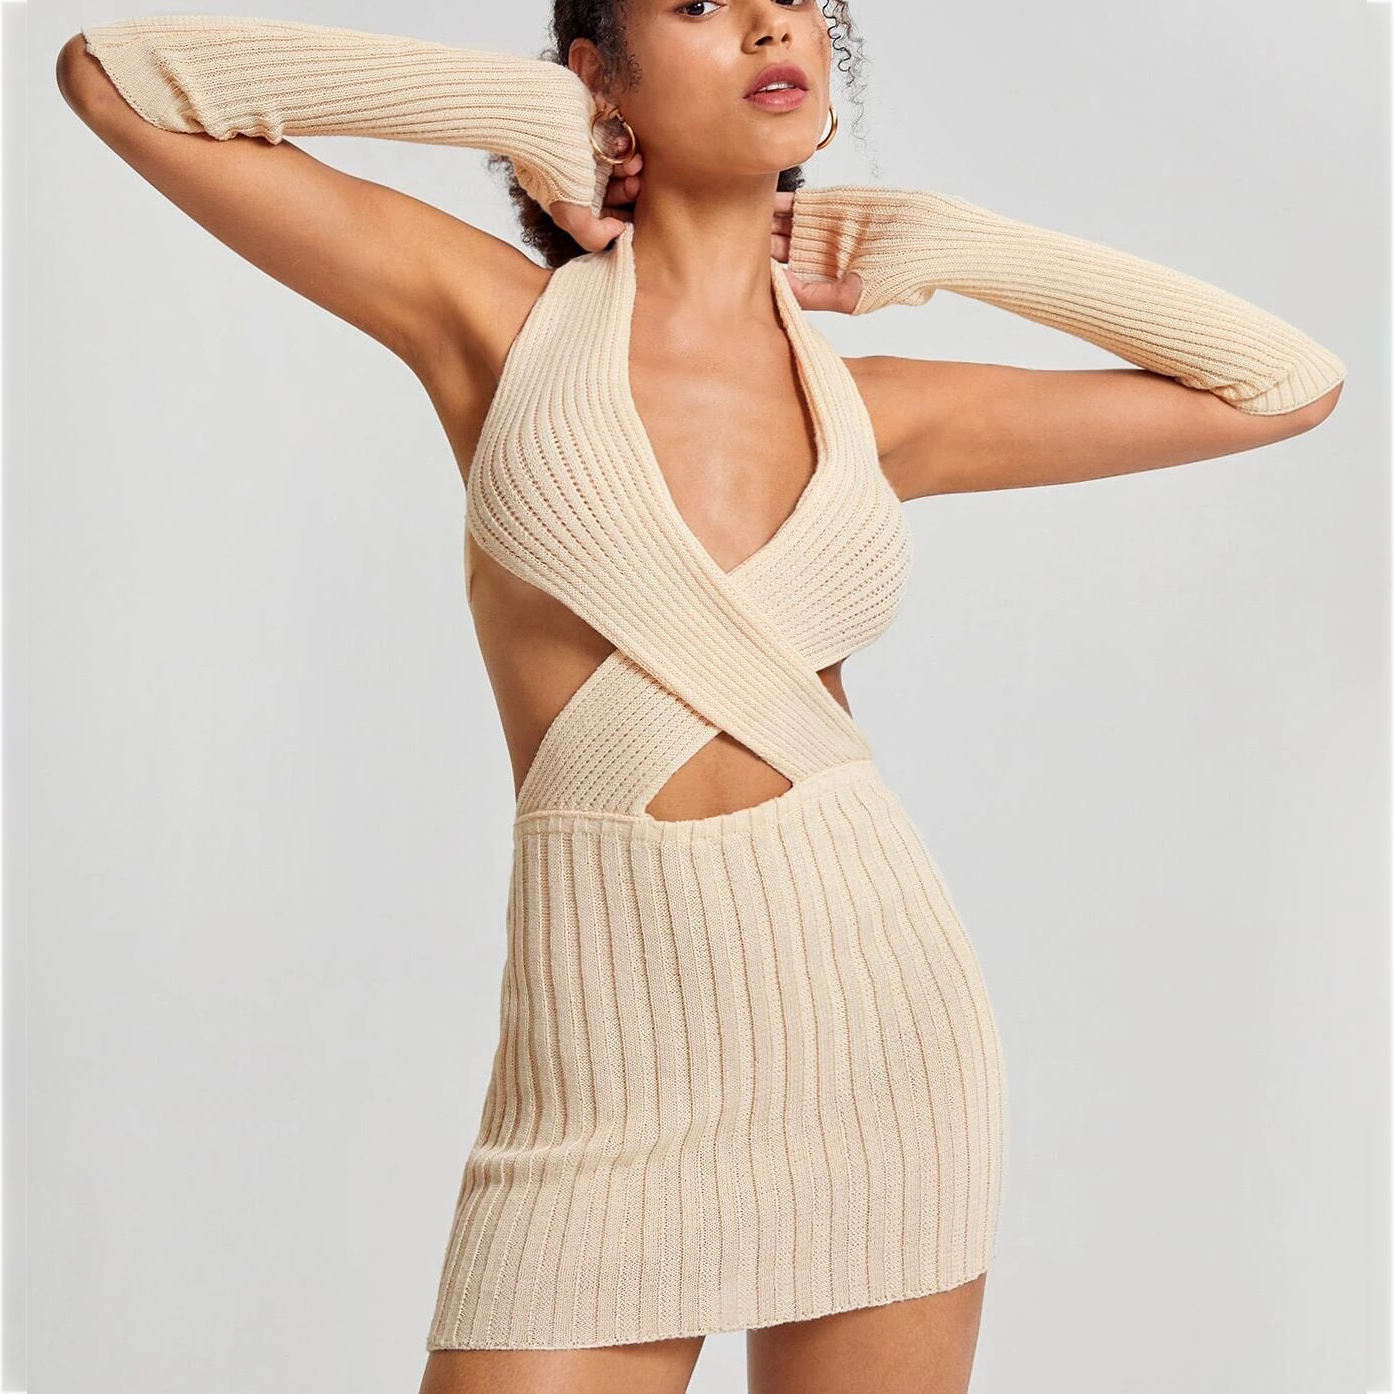 Crisscross Halter Neck Backless Ribbed Knit Bodycon Sweater Dress With Arm Sleeves - M